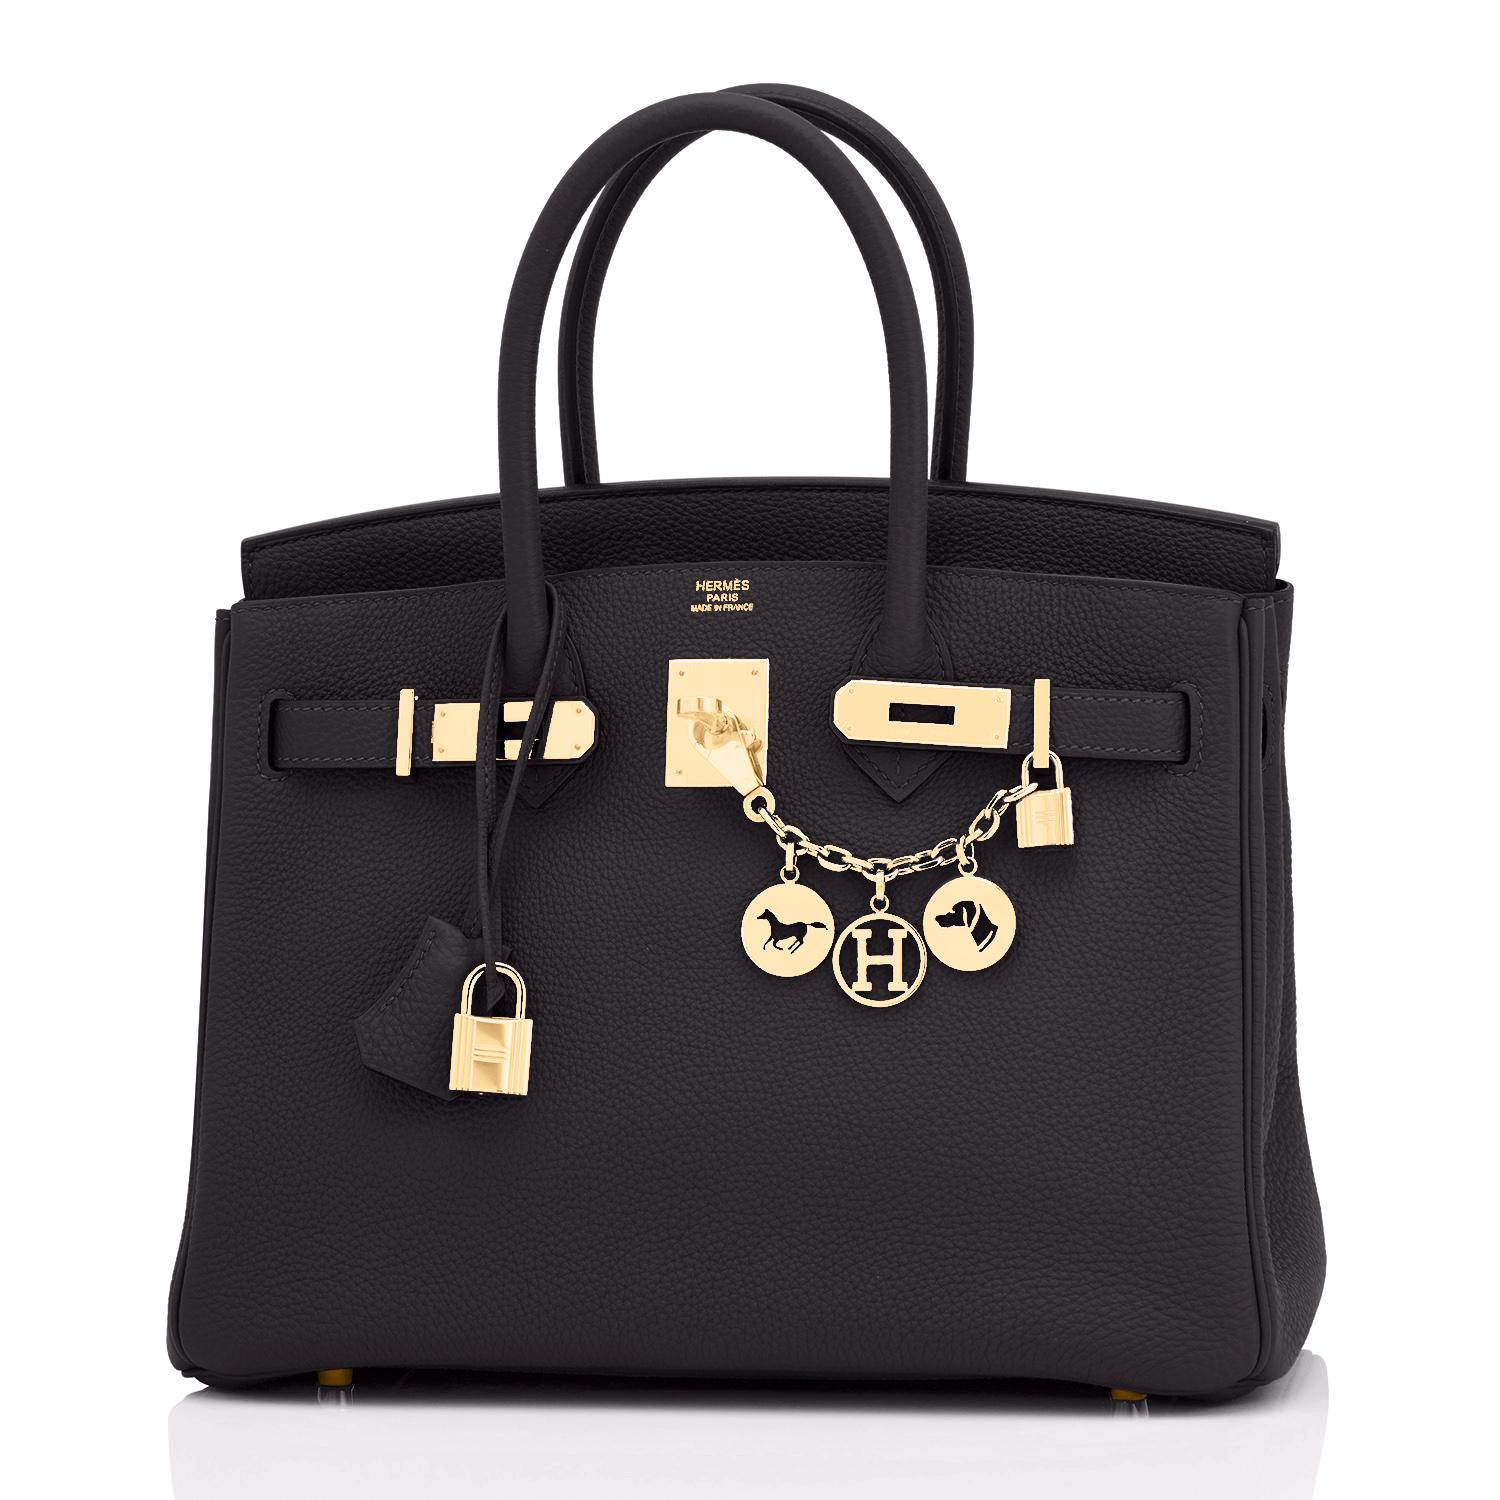 BANK WIRE PRICE ONLY!
Hermes Birkin 30cm Black Togo Gold Hardware Bag Z Stamp, 2021
Brand New in Box. Store Fresh. Pristine Condition (with plastic on hardware)
Just purchased from Hermes store; bag bears new 2021 interior Z stamp! 
Perfect gift!